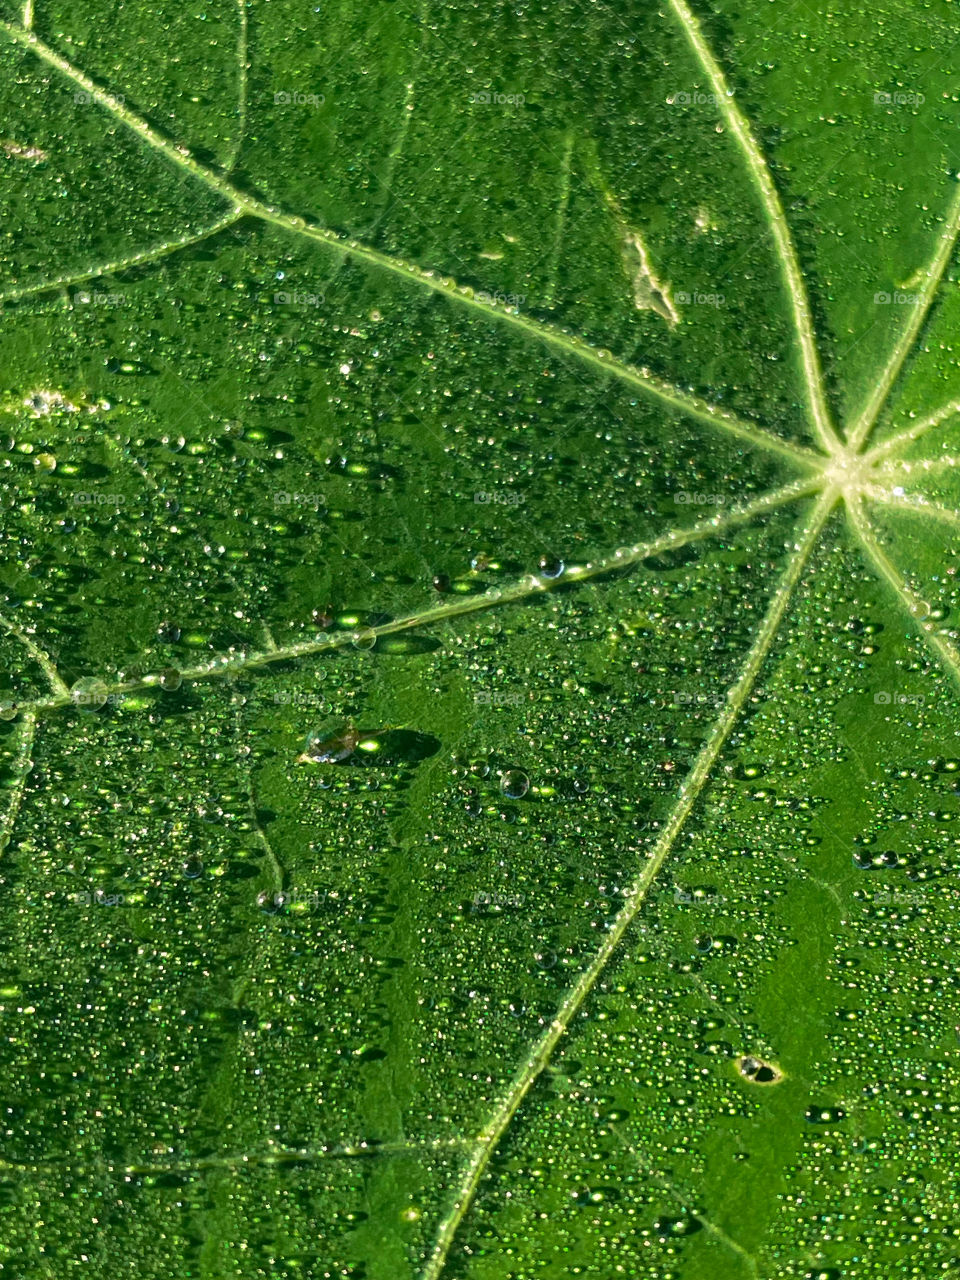 Dew dewy dewdrops leaf close up shot green plant veins bubbles outdoors water waterdrops raindrops rain bubble daylight day bright drops nature natural gorgeous water spots droplets